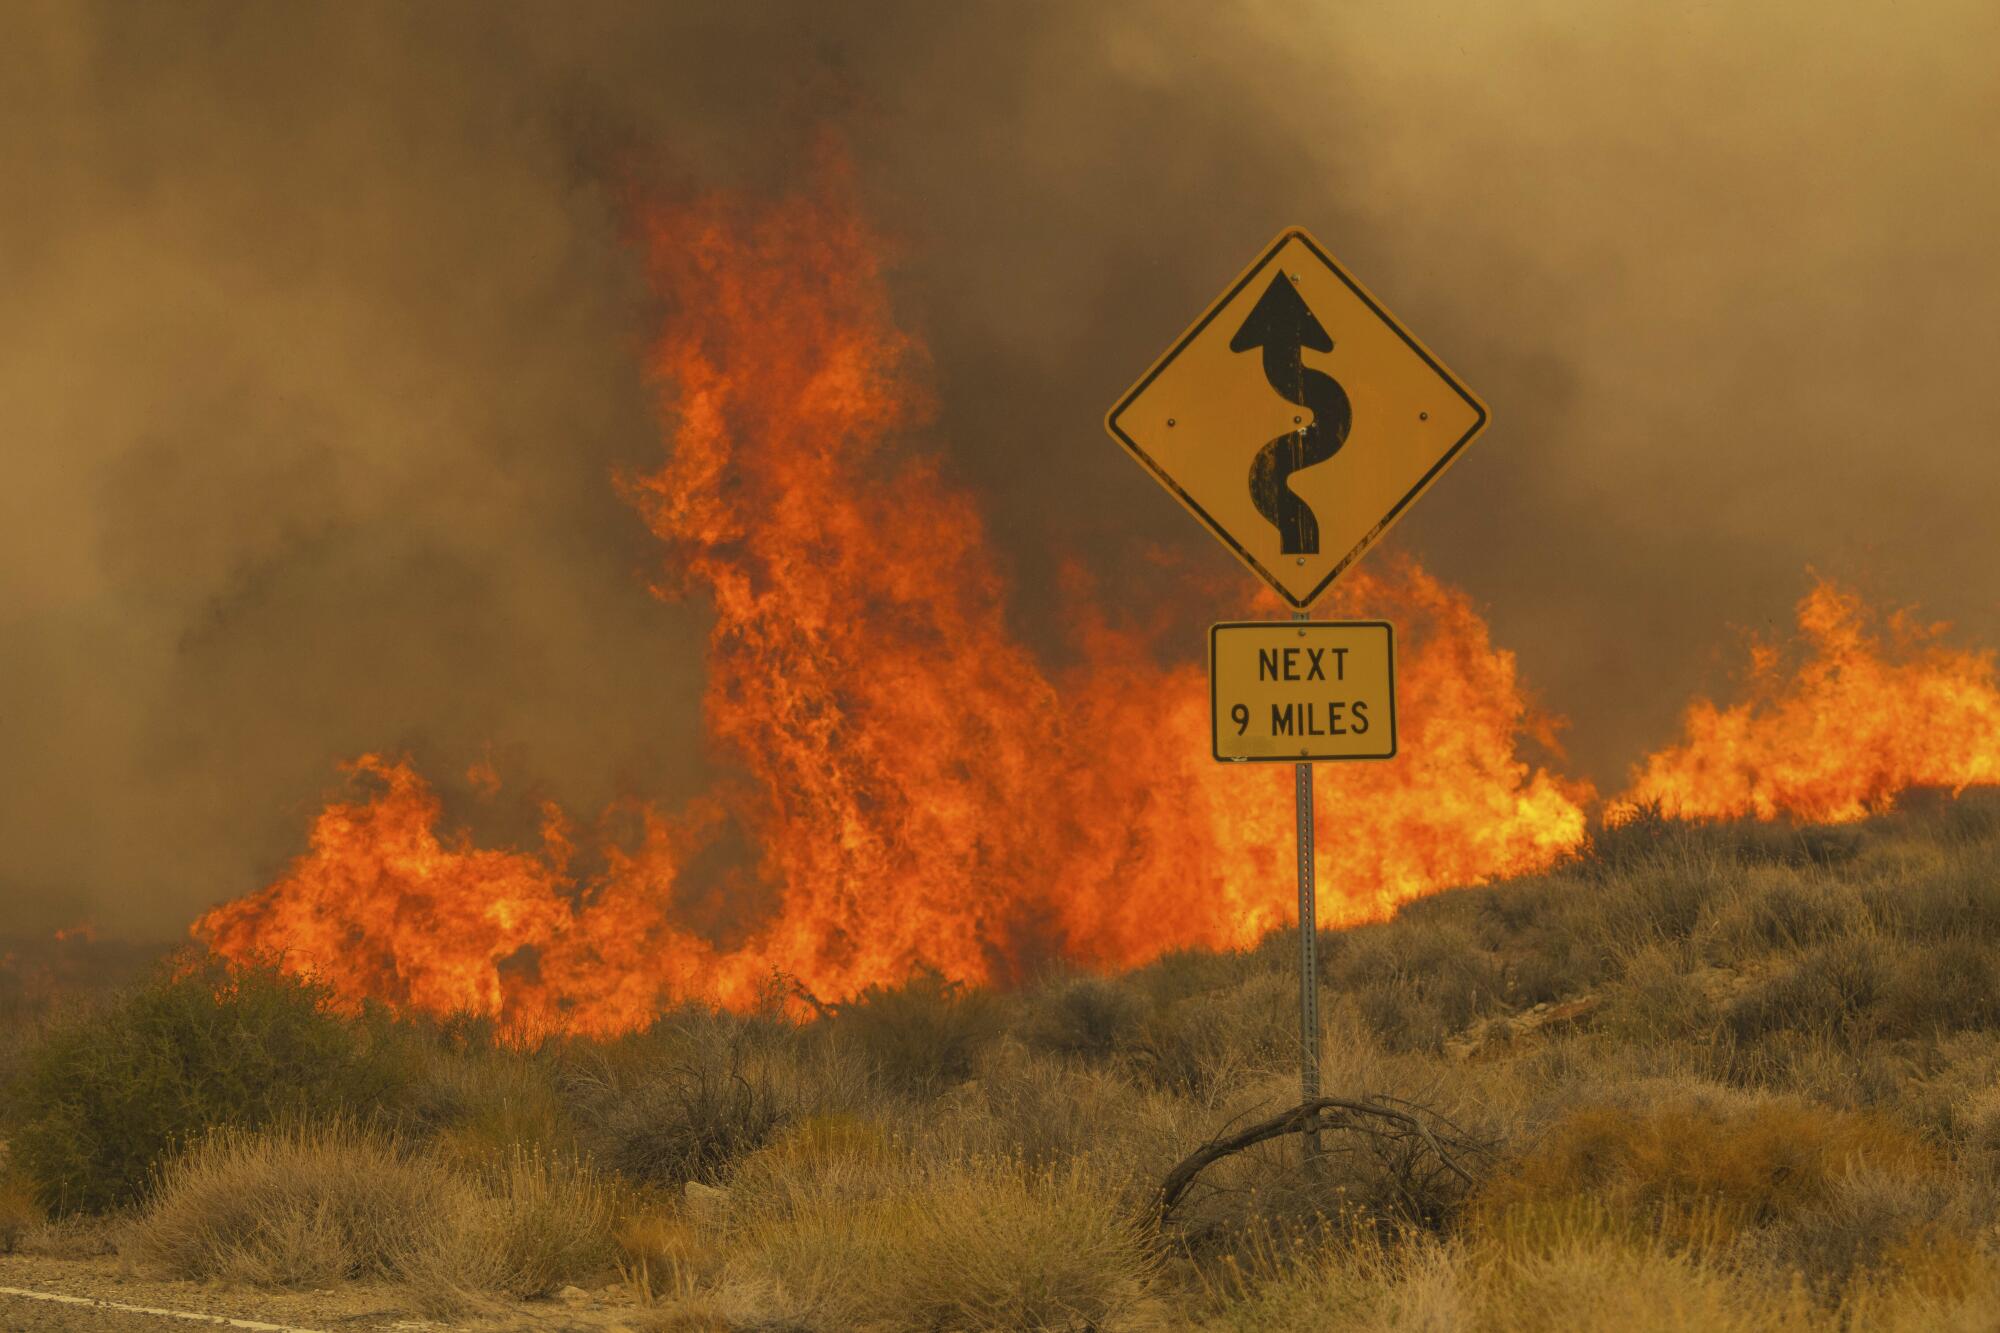 Flames rise from desert brush behind a street sign.